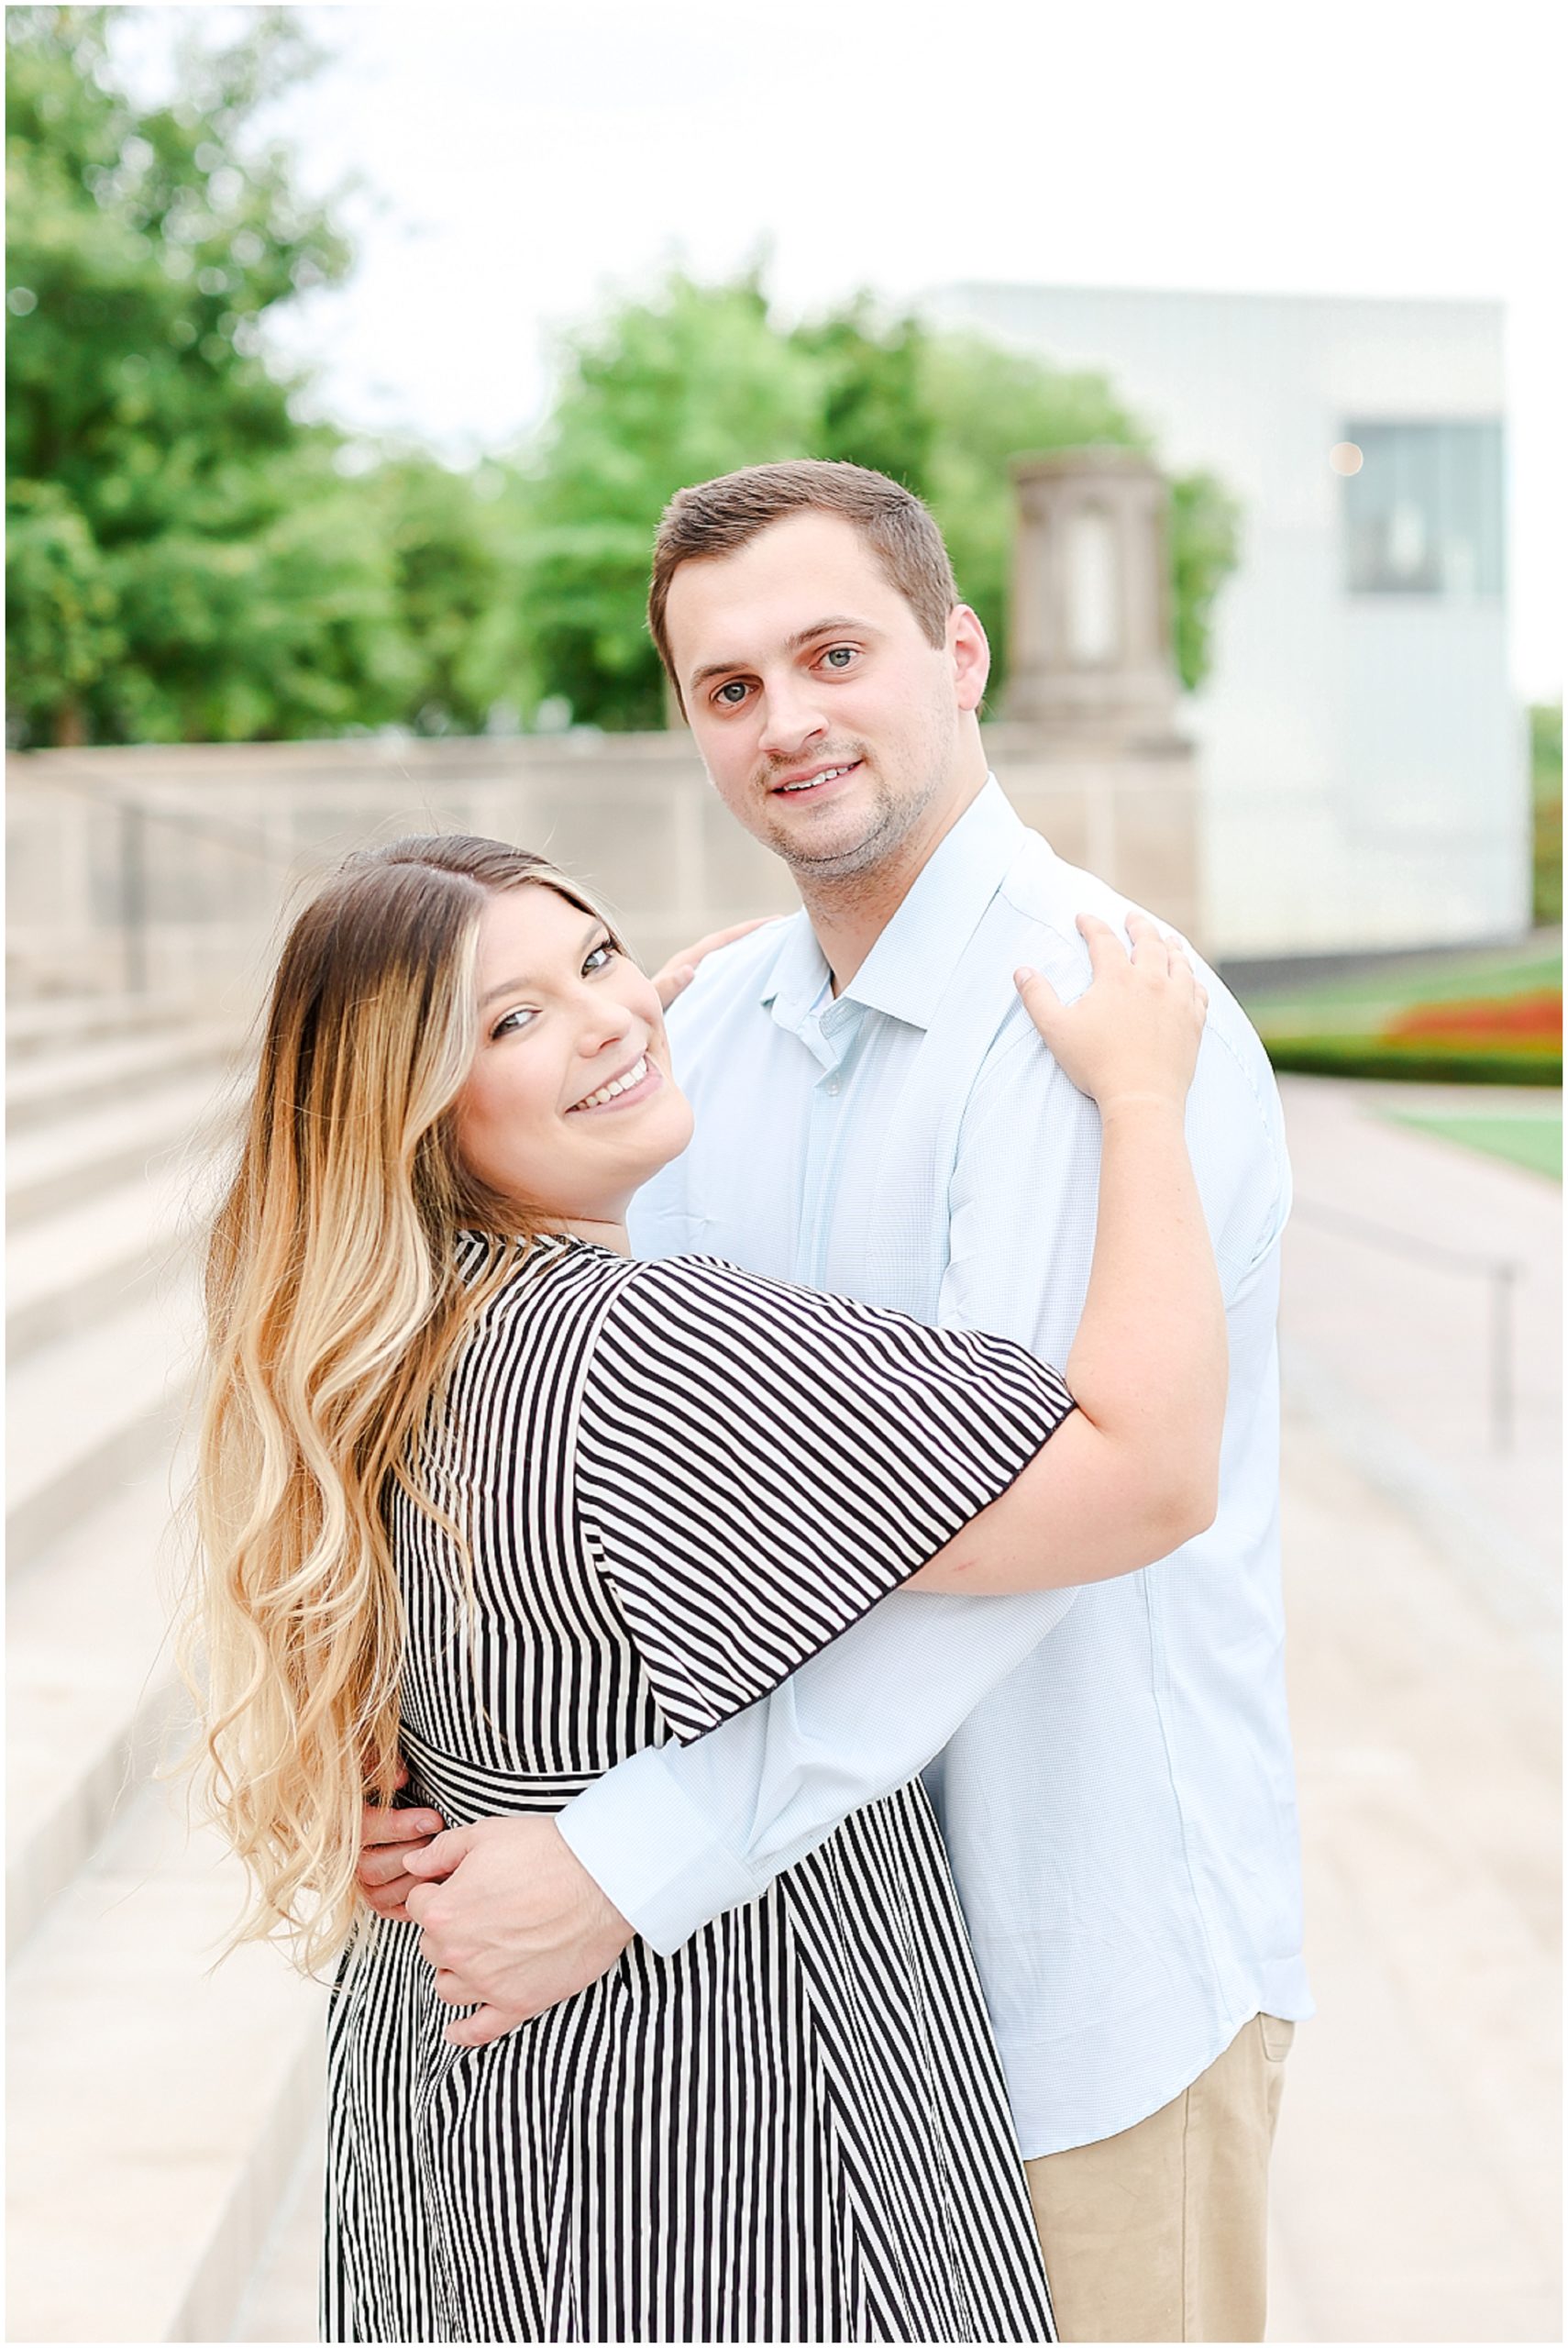 KC Engagement Session for Molly & Austin at the Kansas City Nelson Atkins Museum - Hotel Kansas City Wedding Venue - Where to Get Married in Kansas - Family Portrait Photography